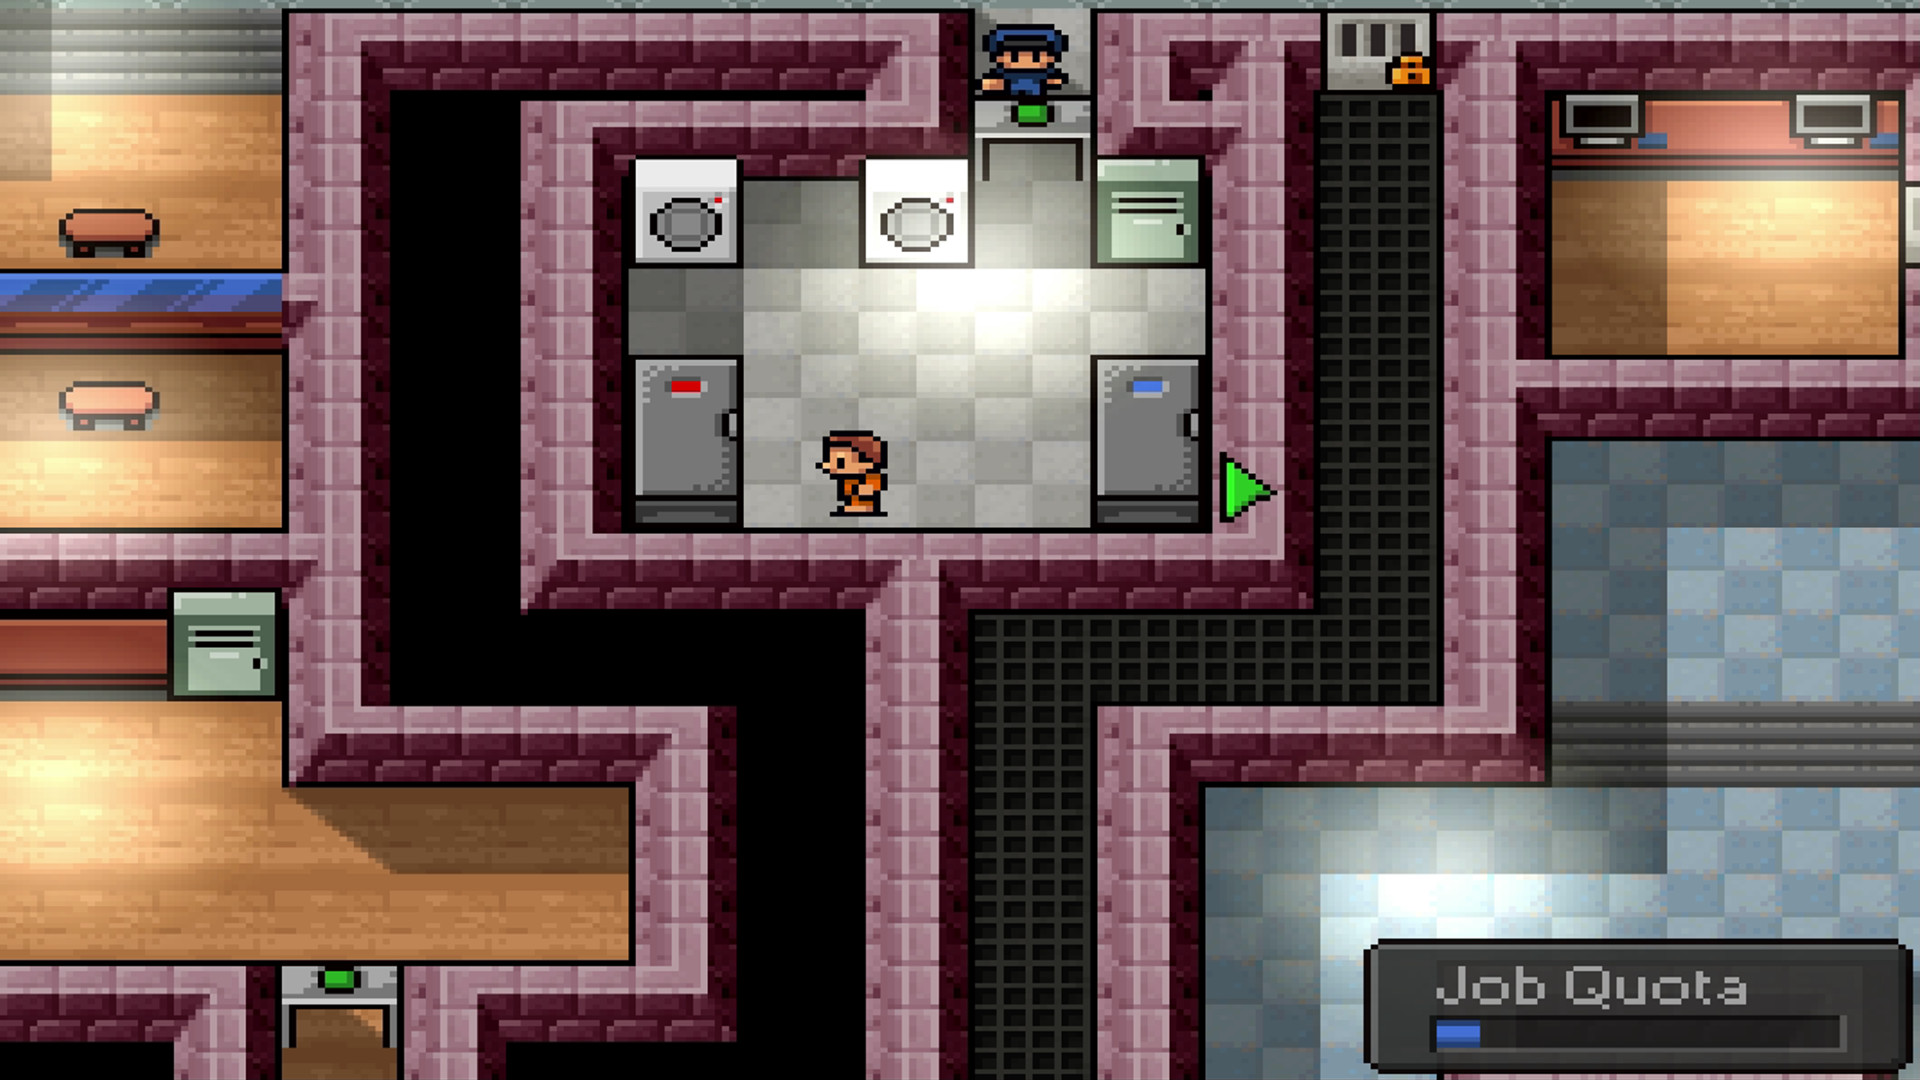 the escapists games download